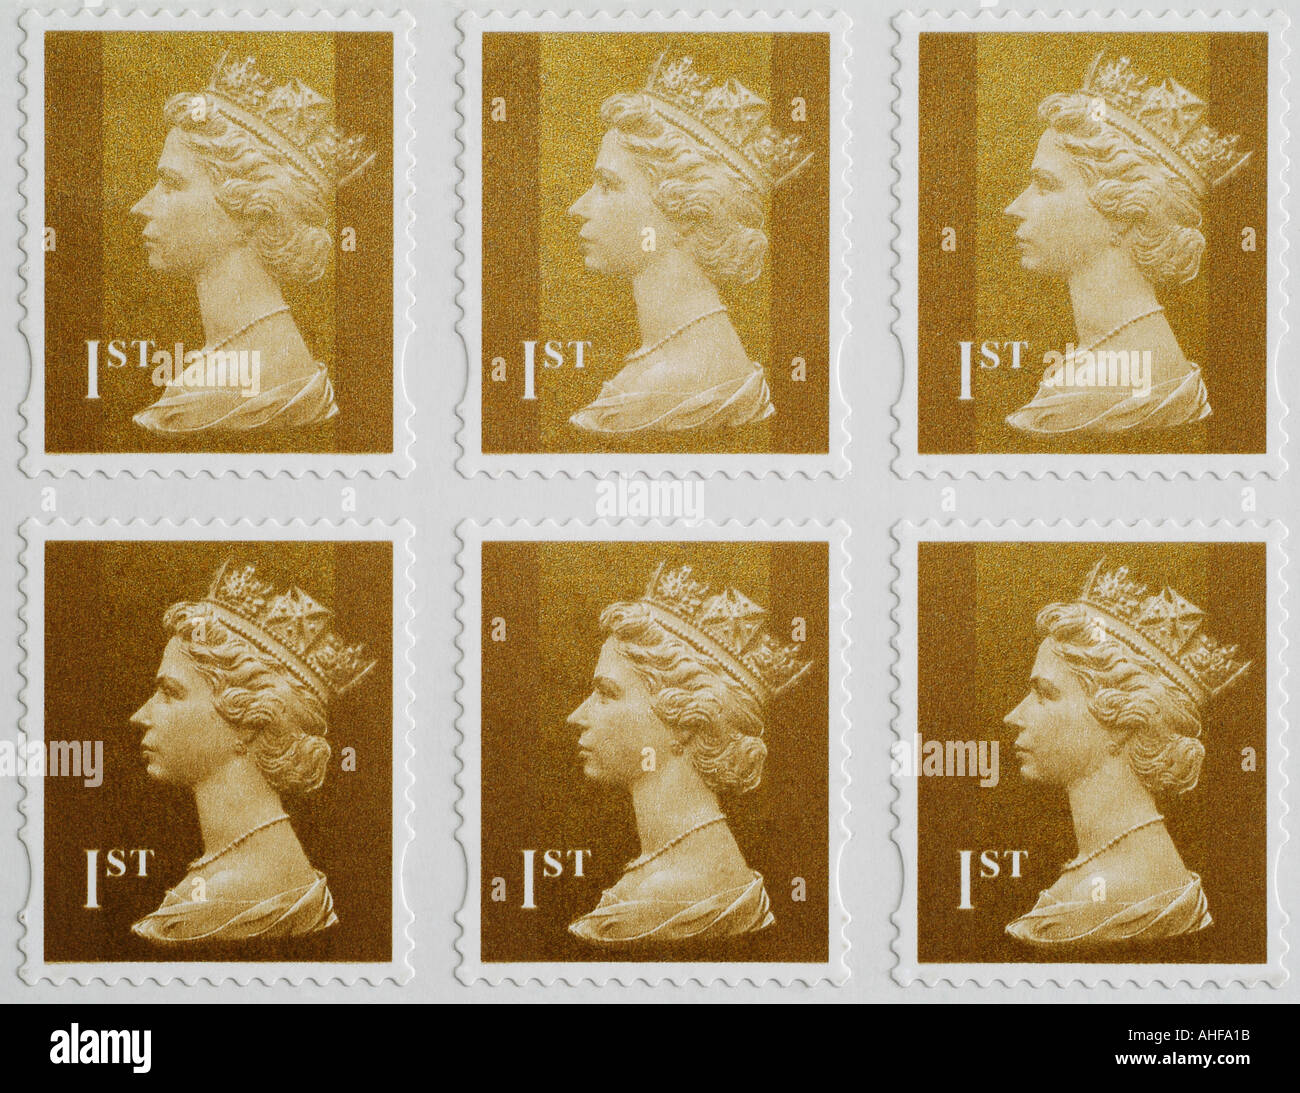 United Kingdom First Class Postage Stamps, Close Up. Stock Photo